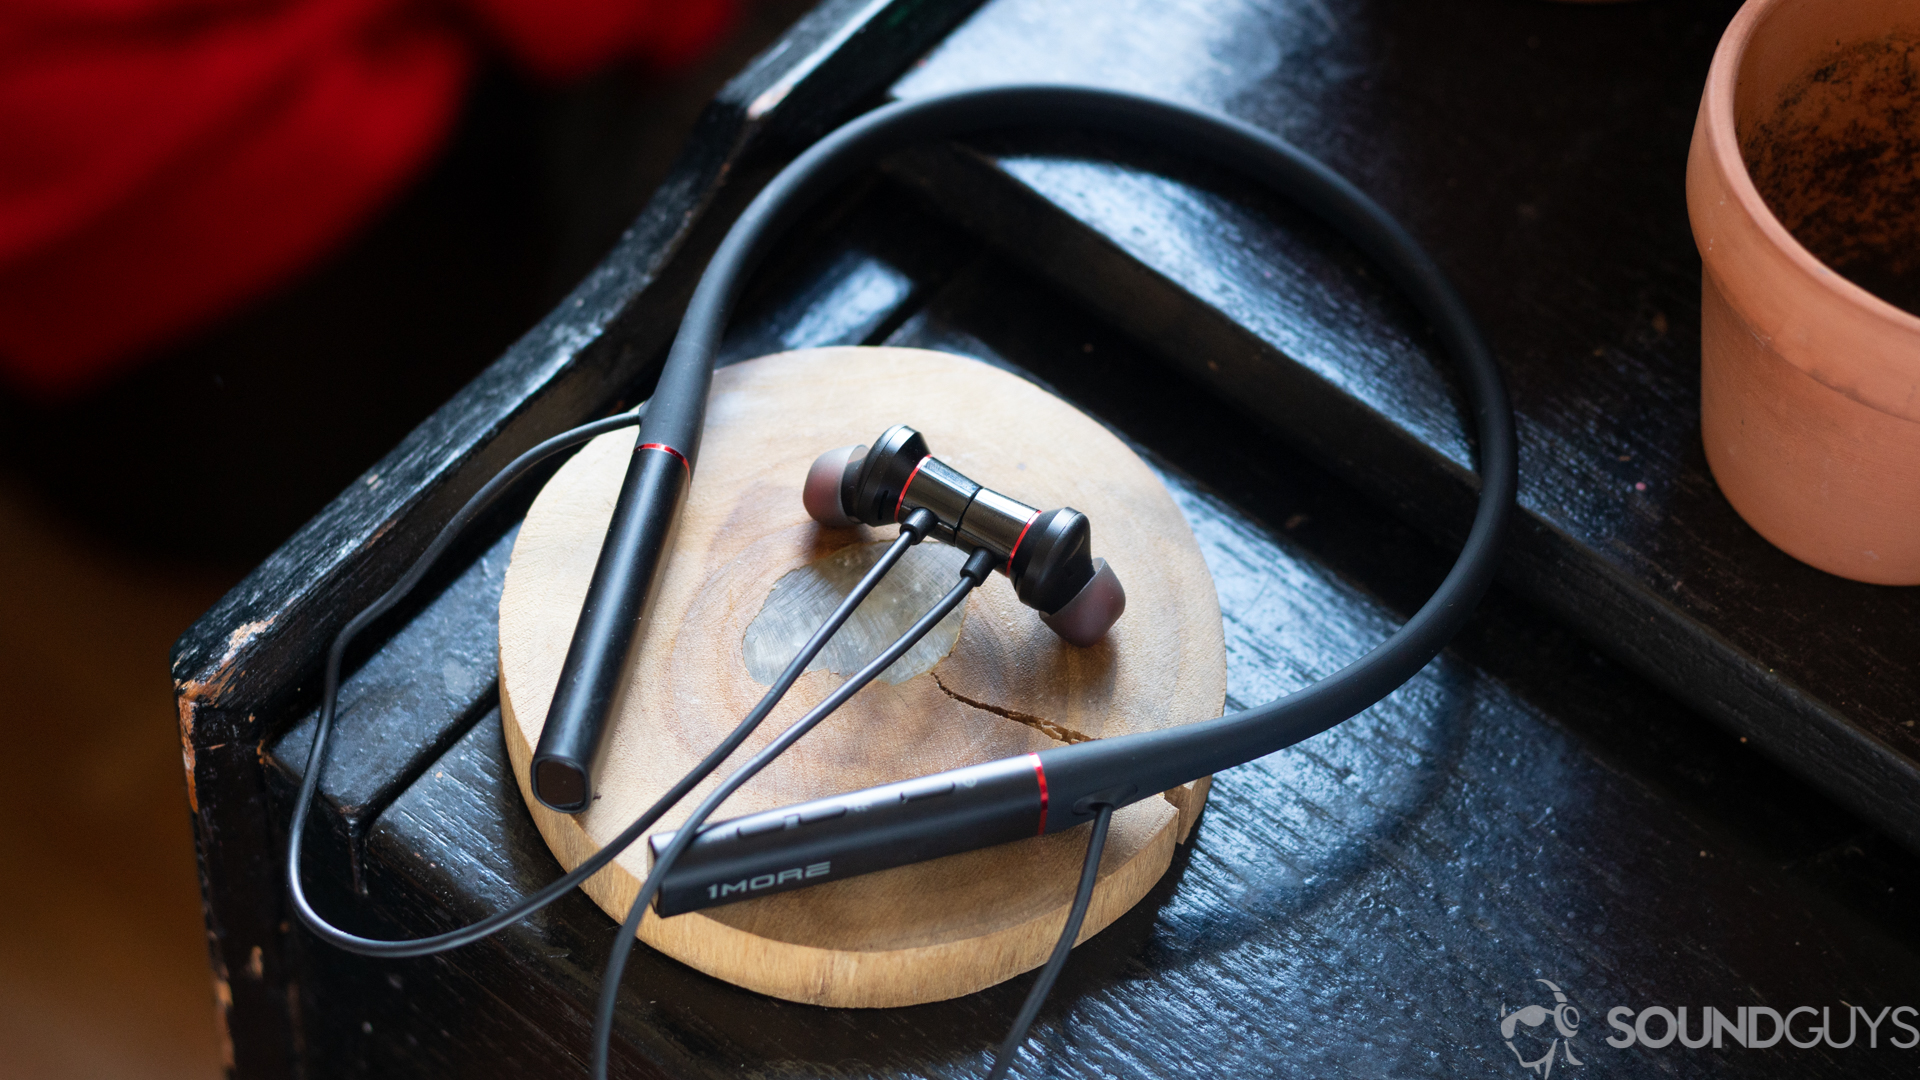 The 1More Dual Driver ANC Pro earbuds on a wooden coaster on top of black table